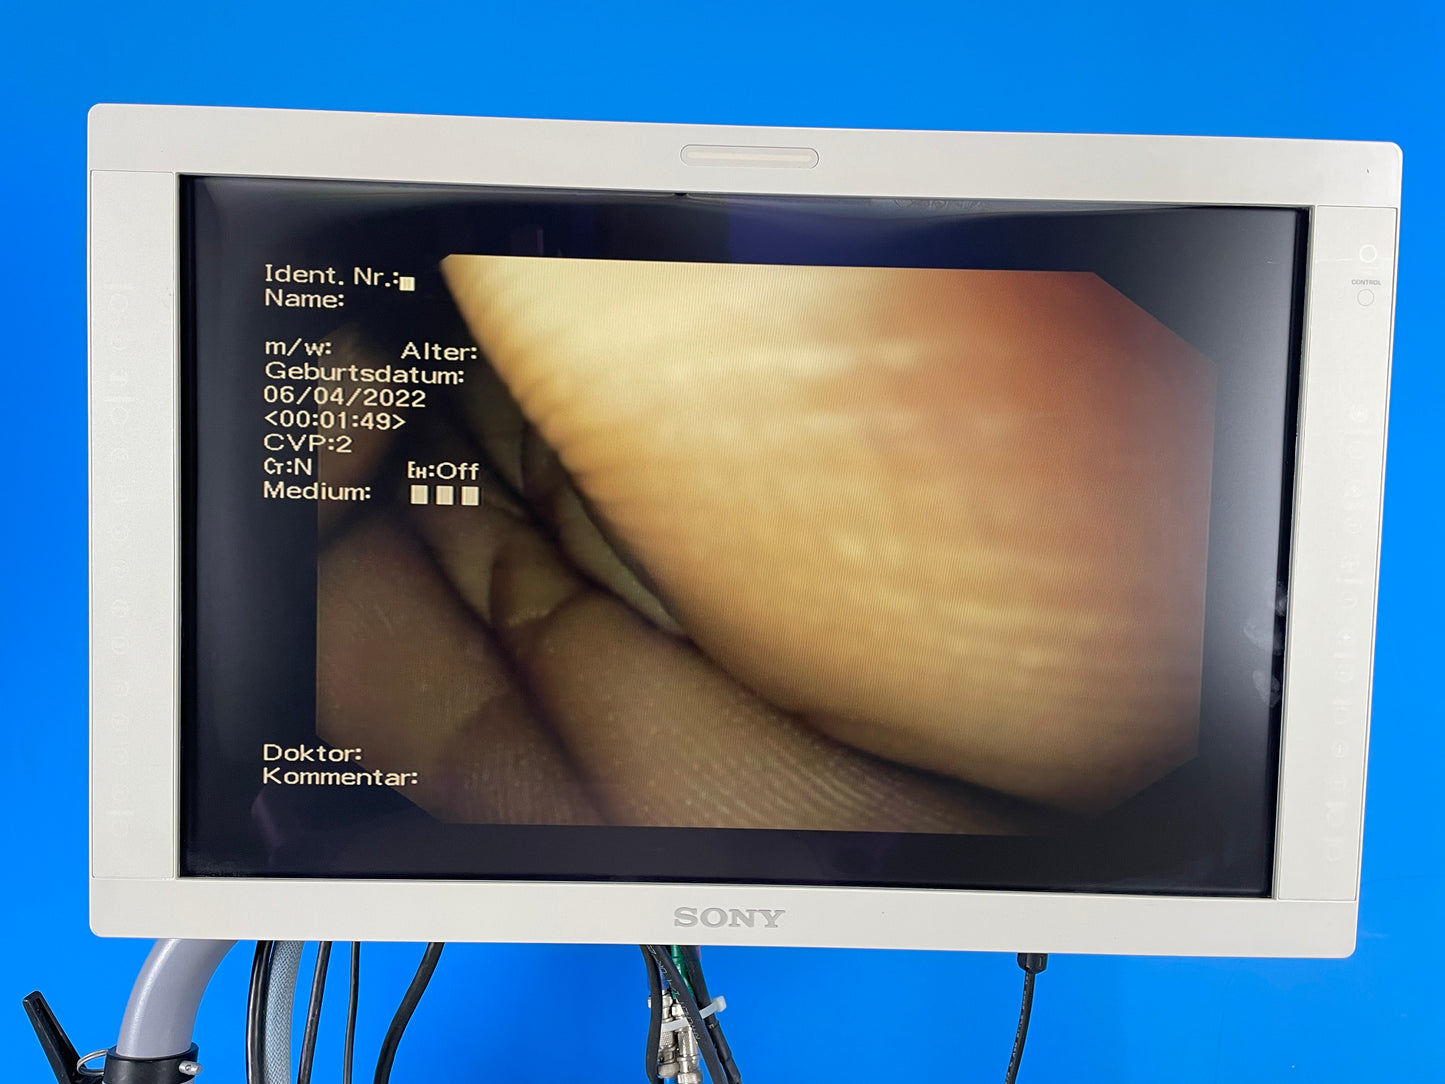 Sony LCD Monitor Widest field of view available in a colonoscope, 170 degrees Full screen display size give superior image quality